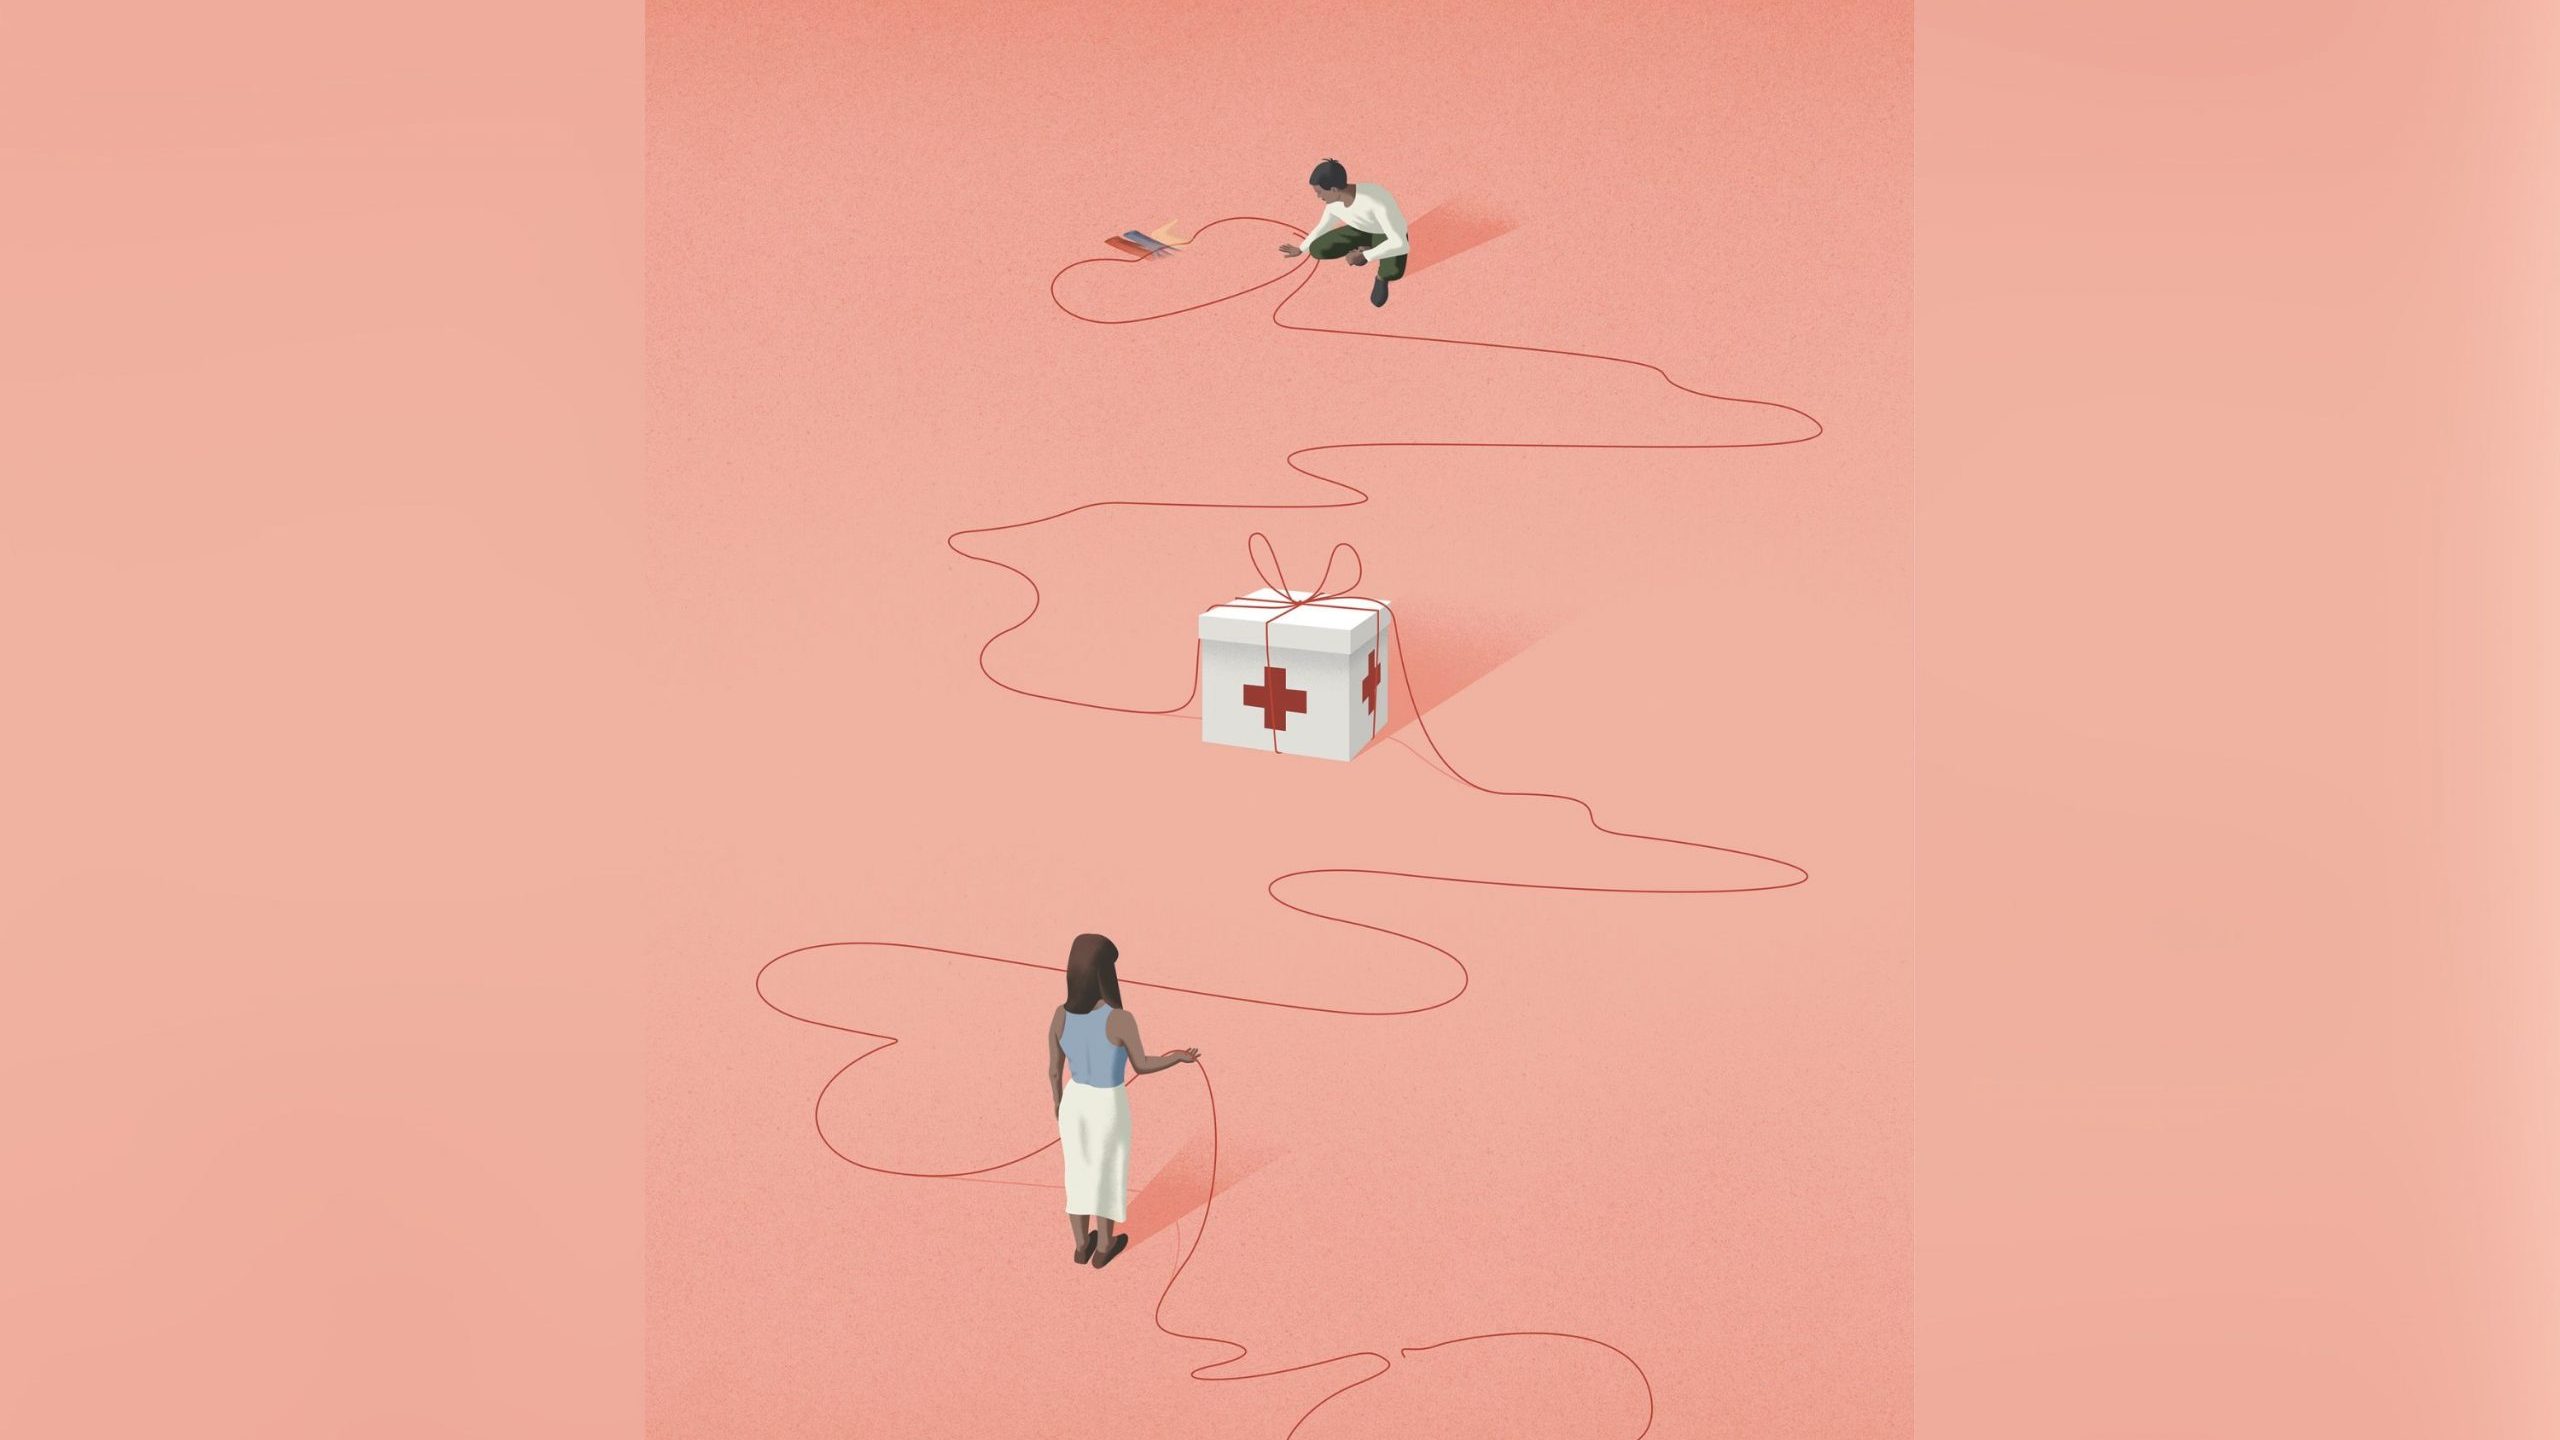 Illustration shows two people, both holding a string, with a gift-wrapped box in the middle of them with a red cross on it. The string is used as the box's gift wrap.